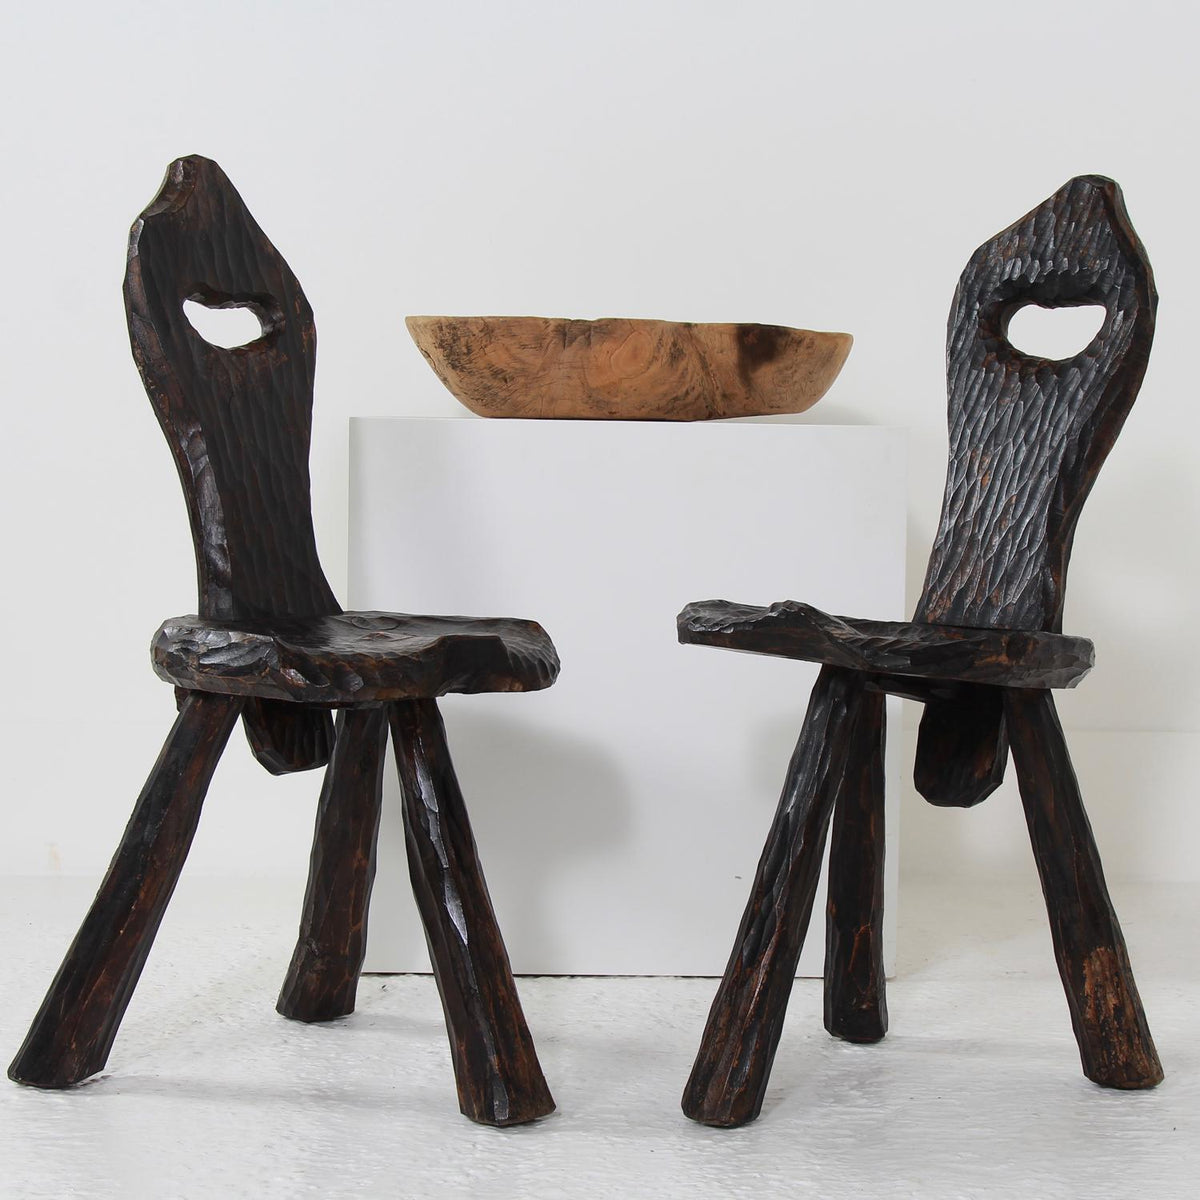 Near Pair of French Midcentury Three-Legged Rustic Chairs